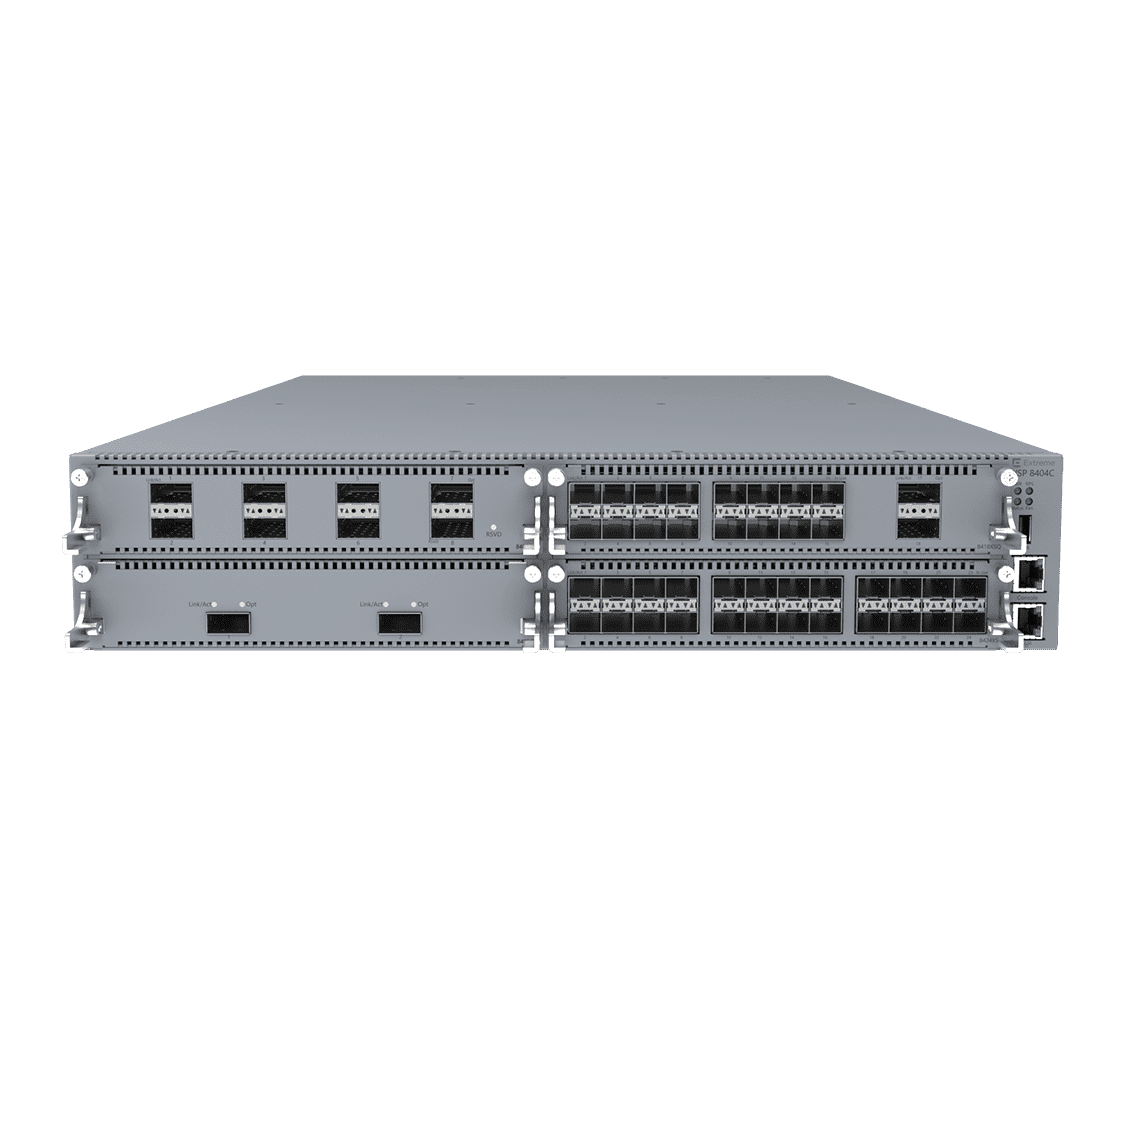 Get Extreme Networks VSP 8400 from Malaysia Distributor - vnetwork